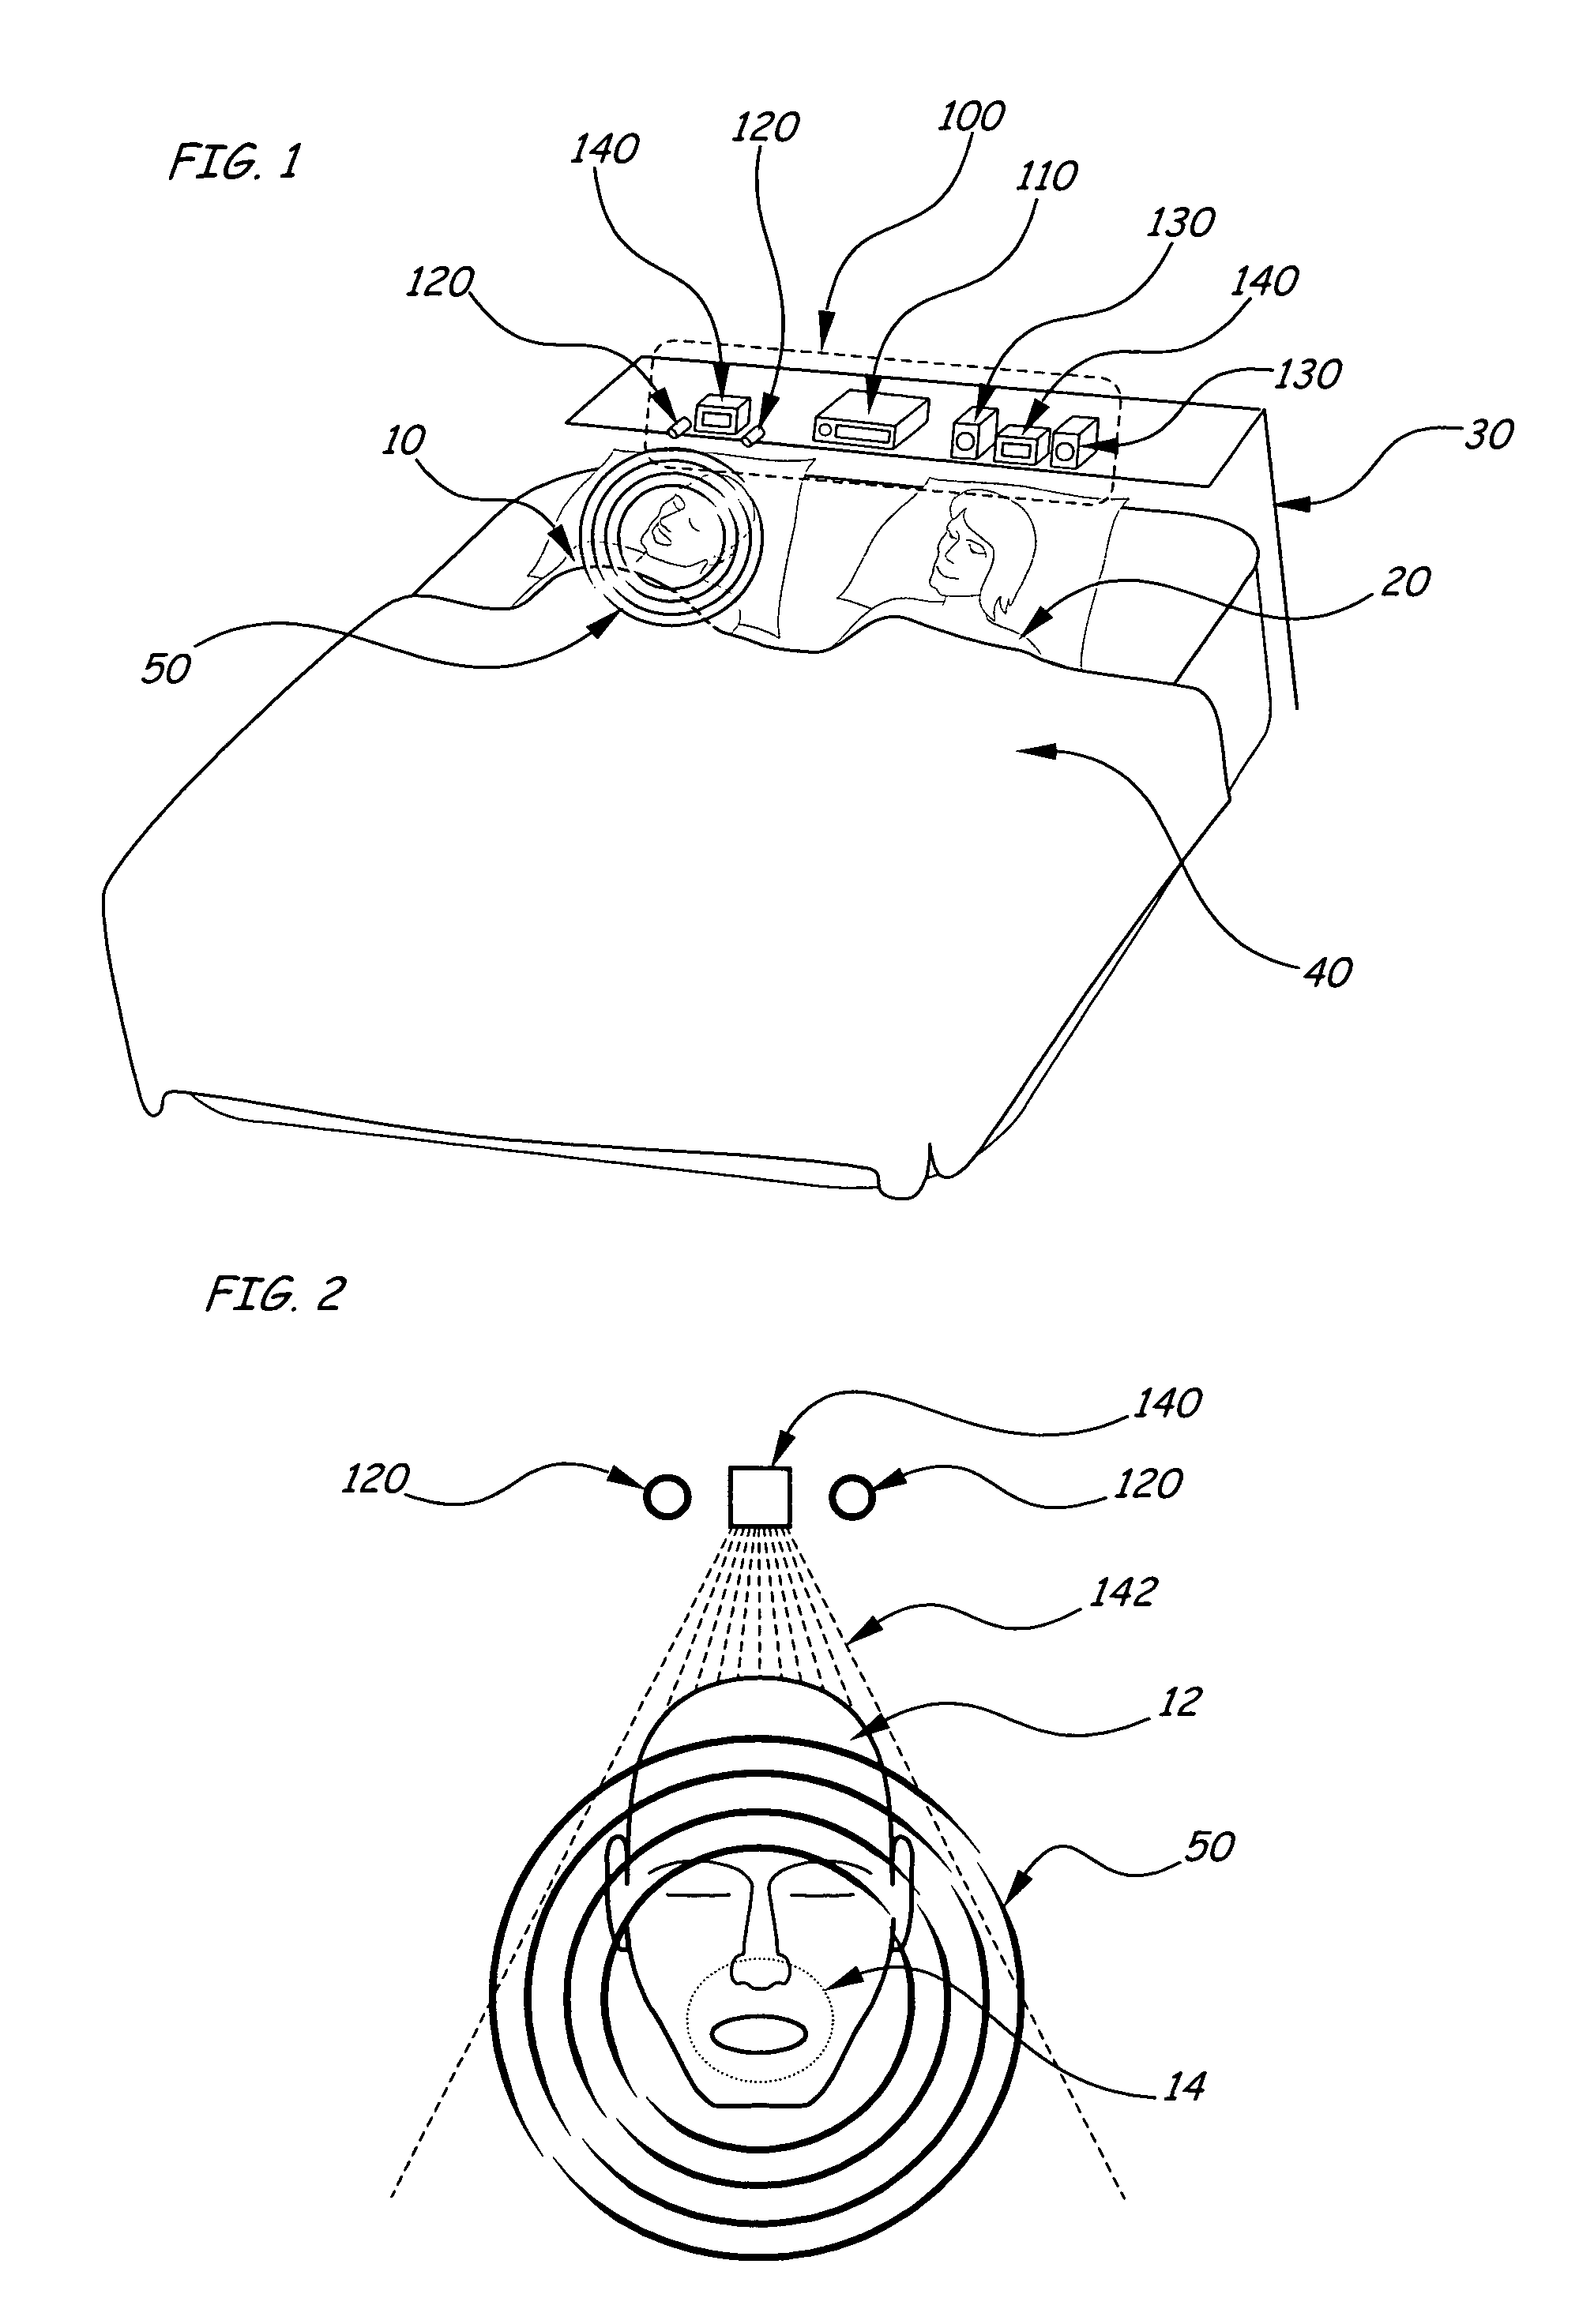 Sound canceling systems and methods